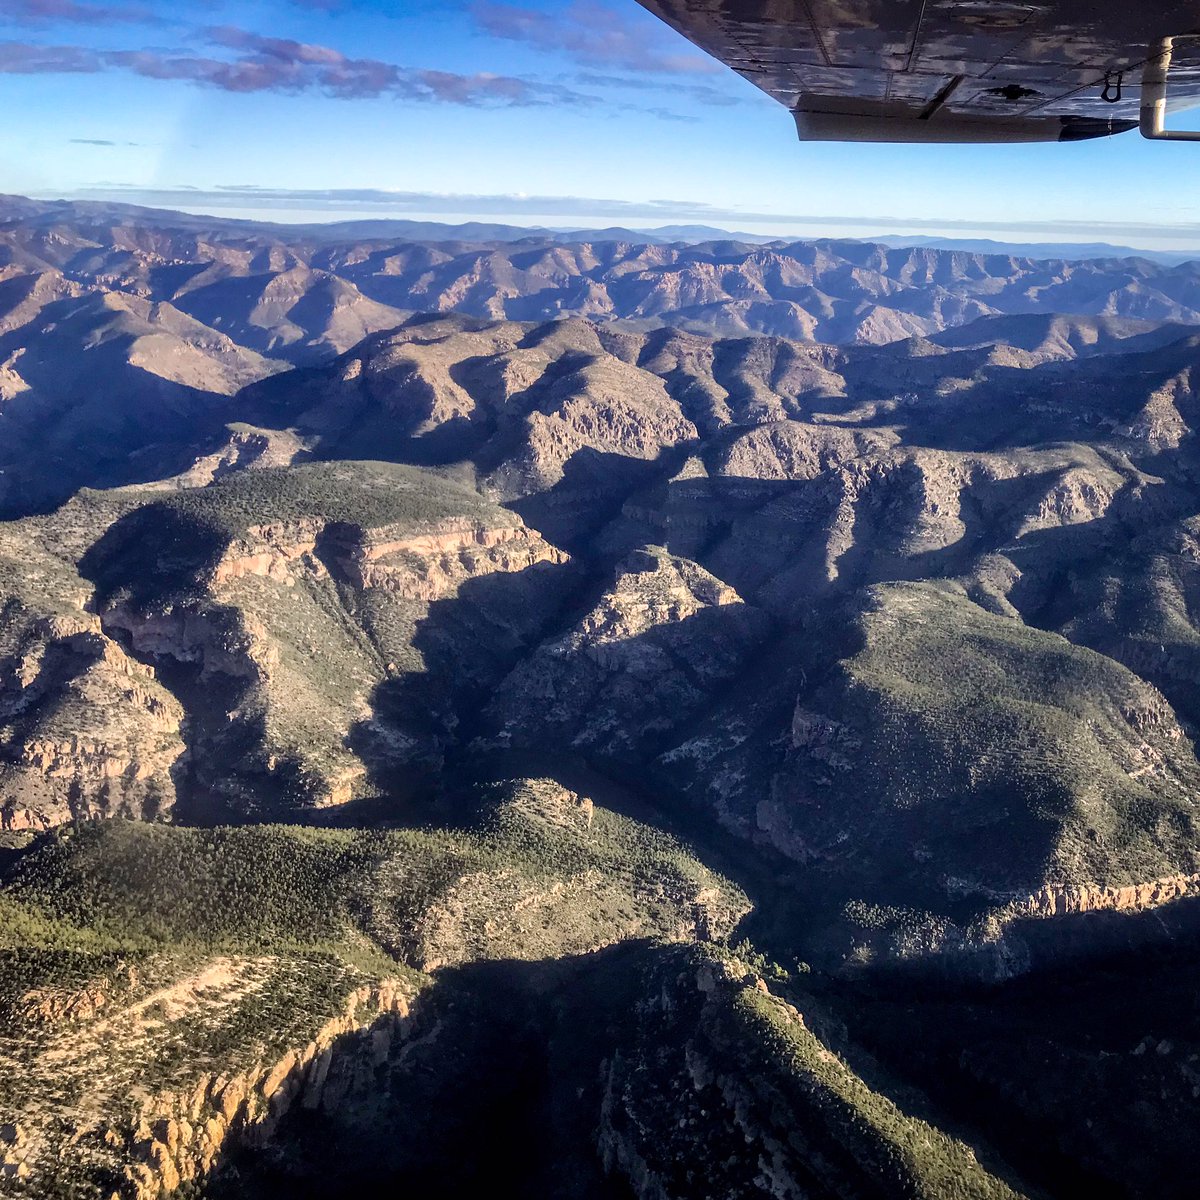 Uh-Maze-Ing morning flight over the #gila #wilderness and our nations next #wildandscenic river. Thanks to @EcoFlight1 and @nmwild for the #aerial tour. @americanrivers @wrirvin8